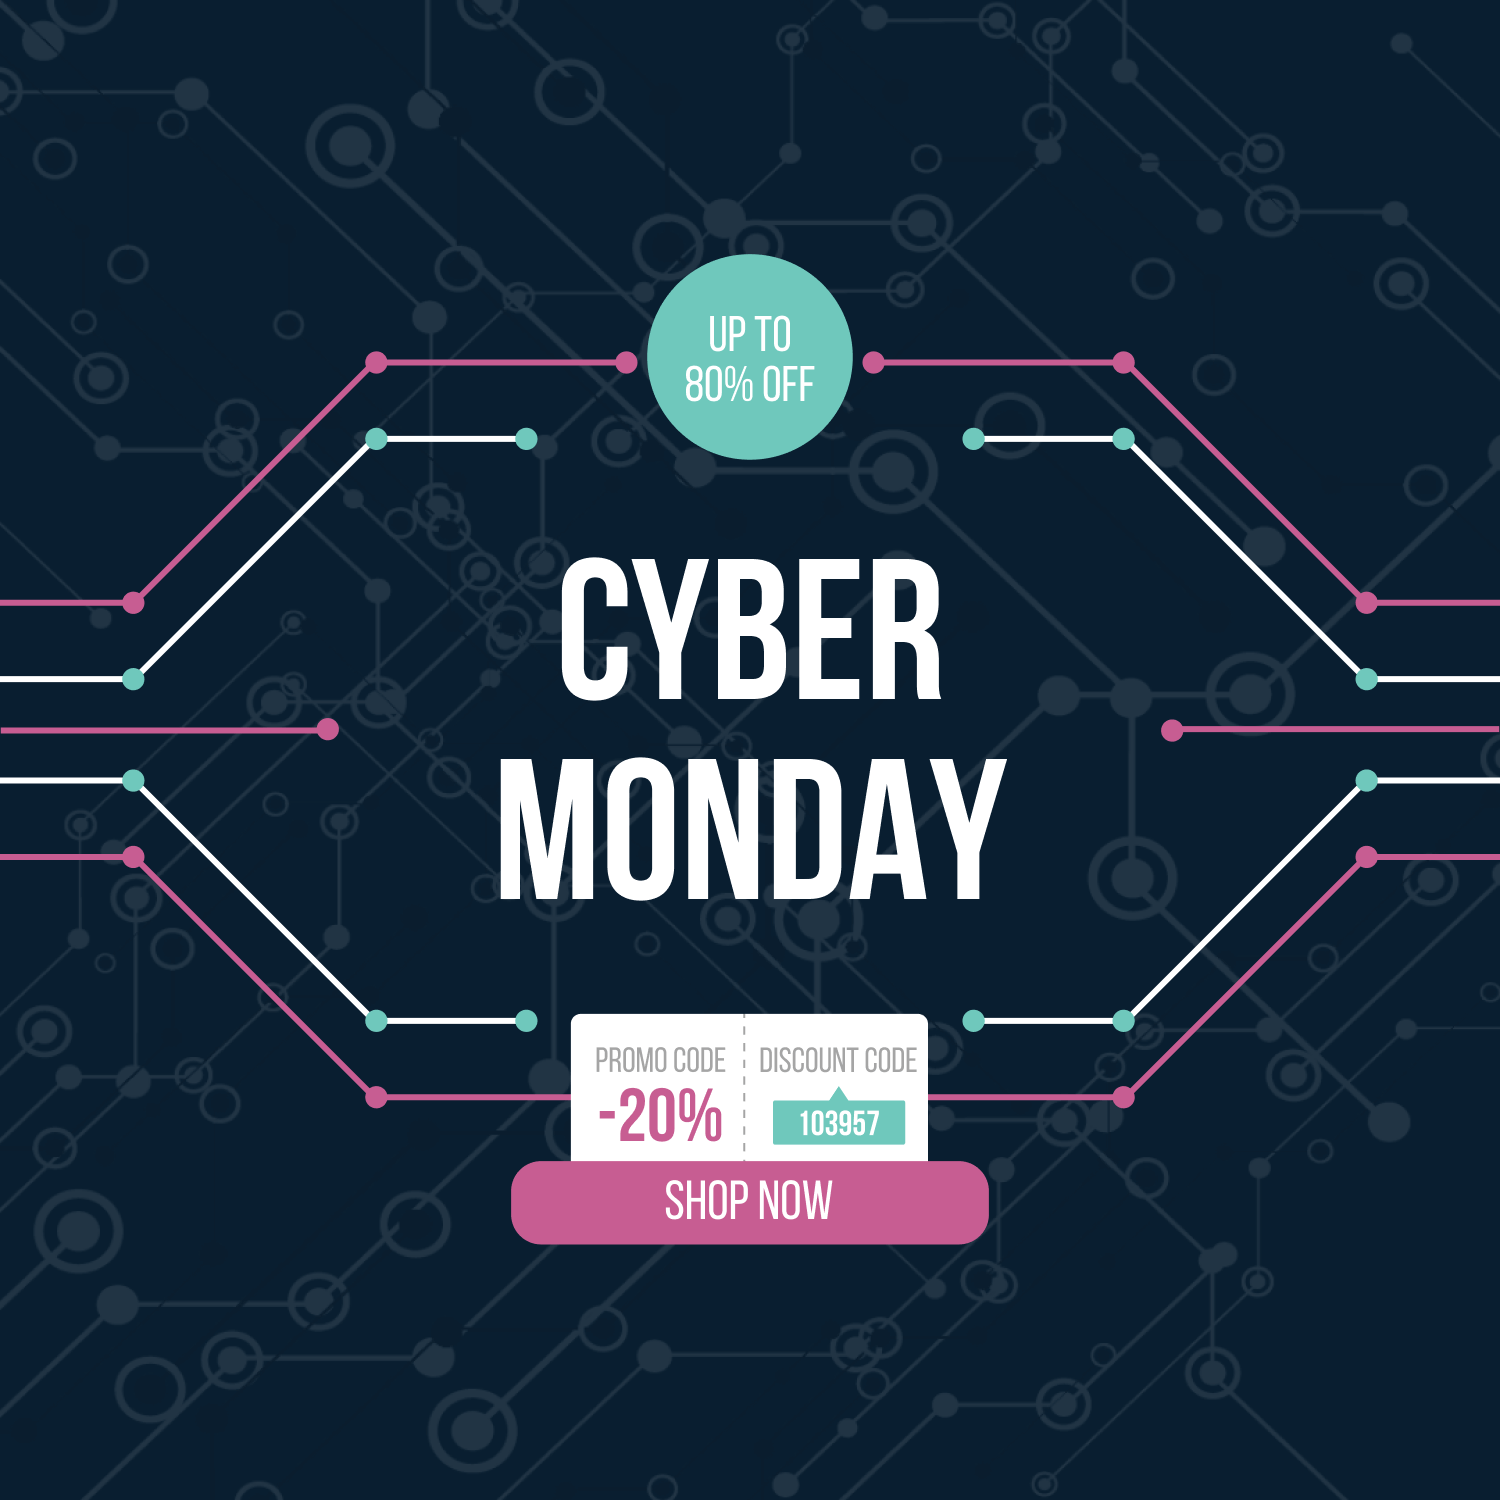 Creative Cyber Monday Free Banner cover image.